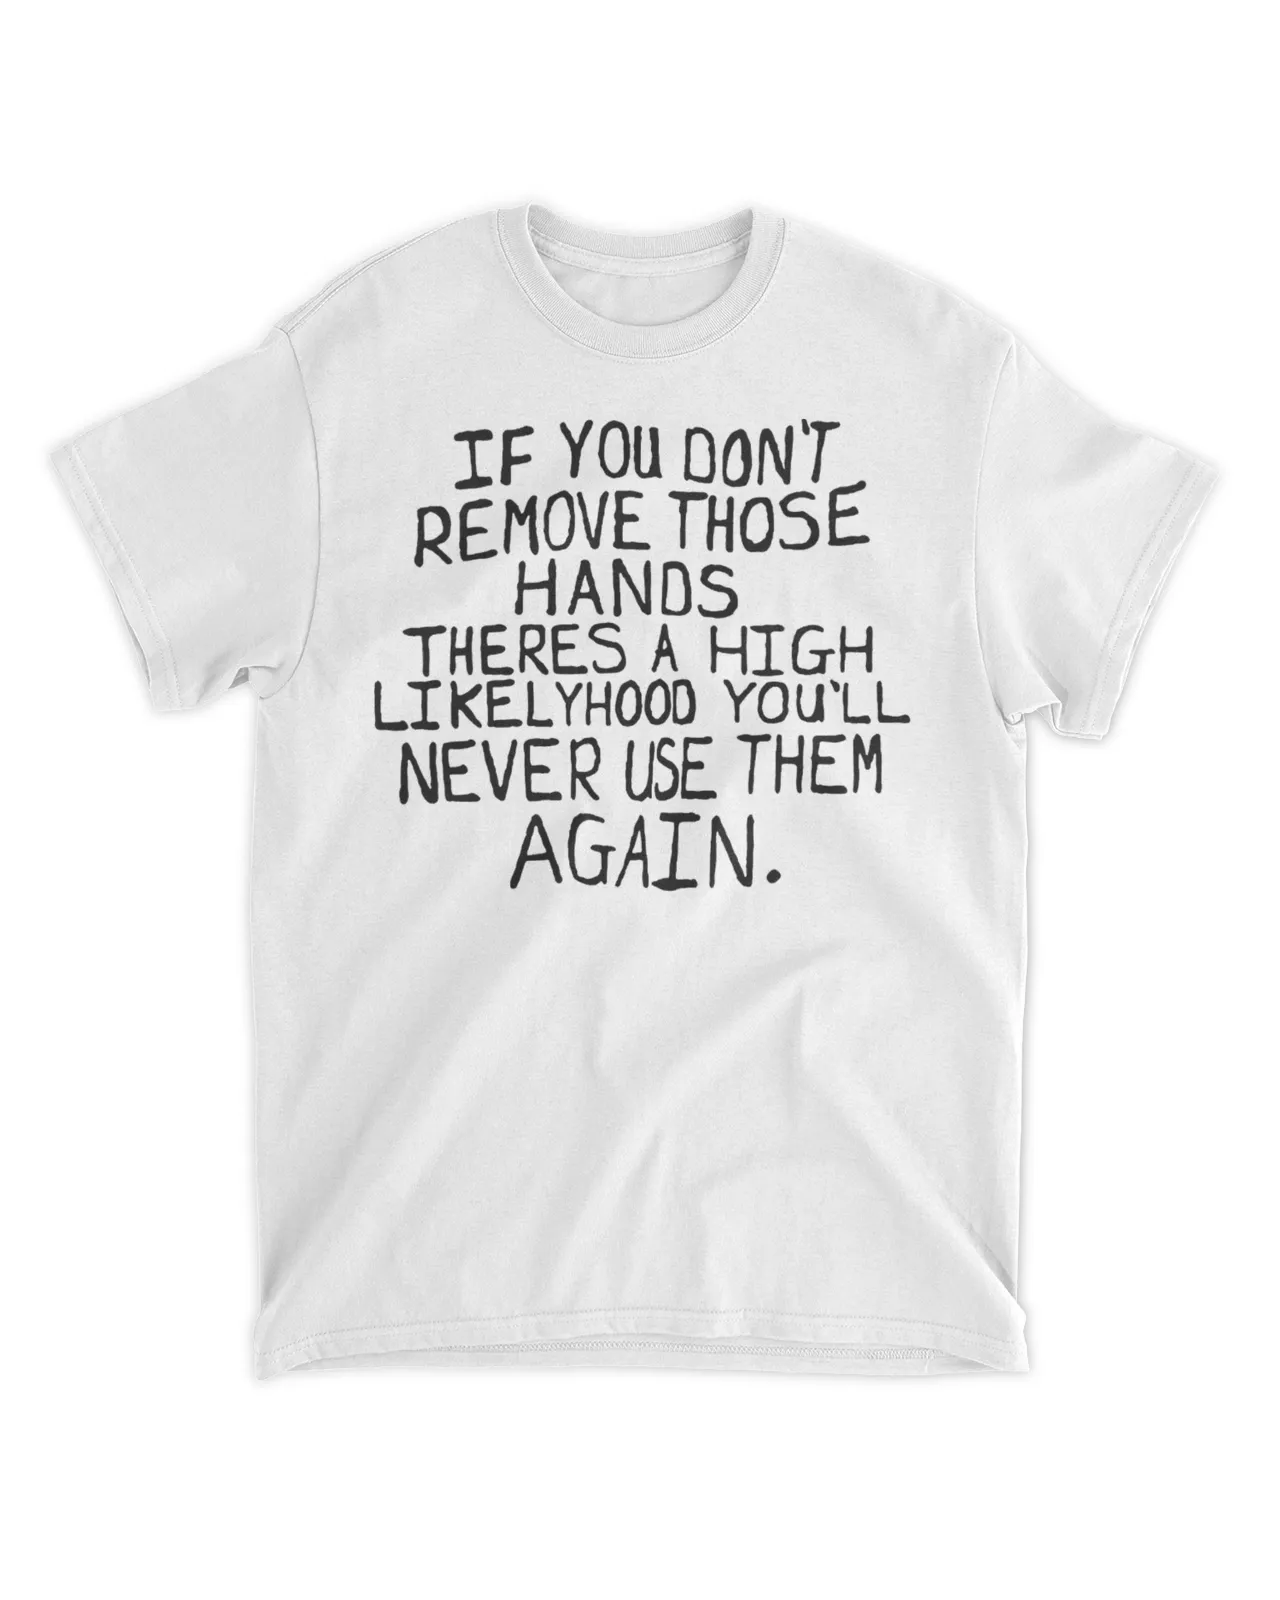  If you don't remove those hands theres a high likelyhood you'll never use them again shirt